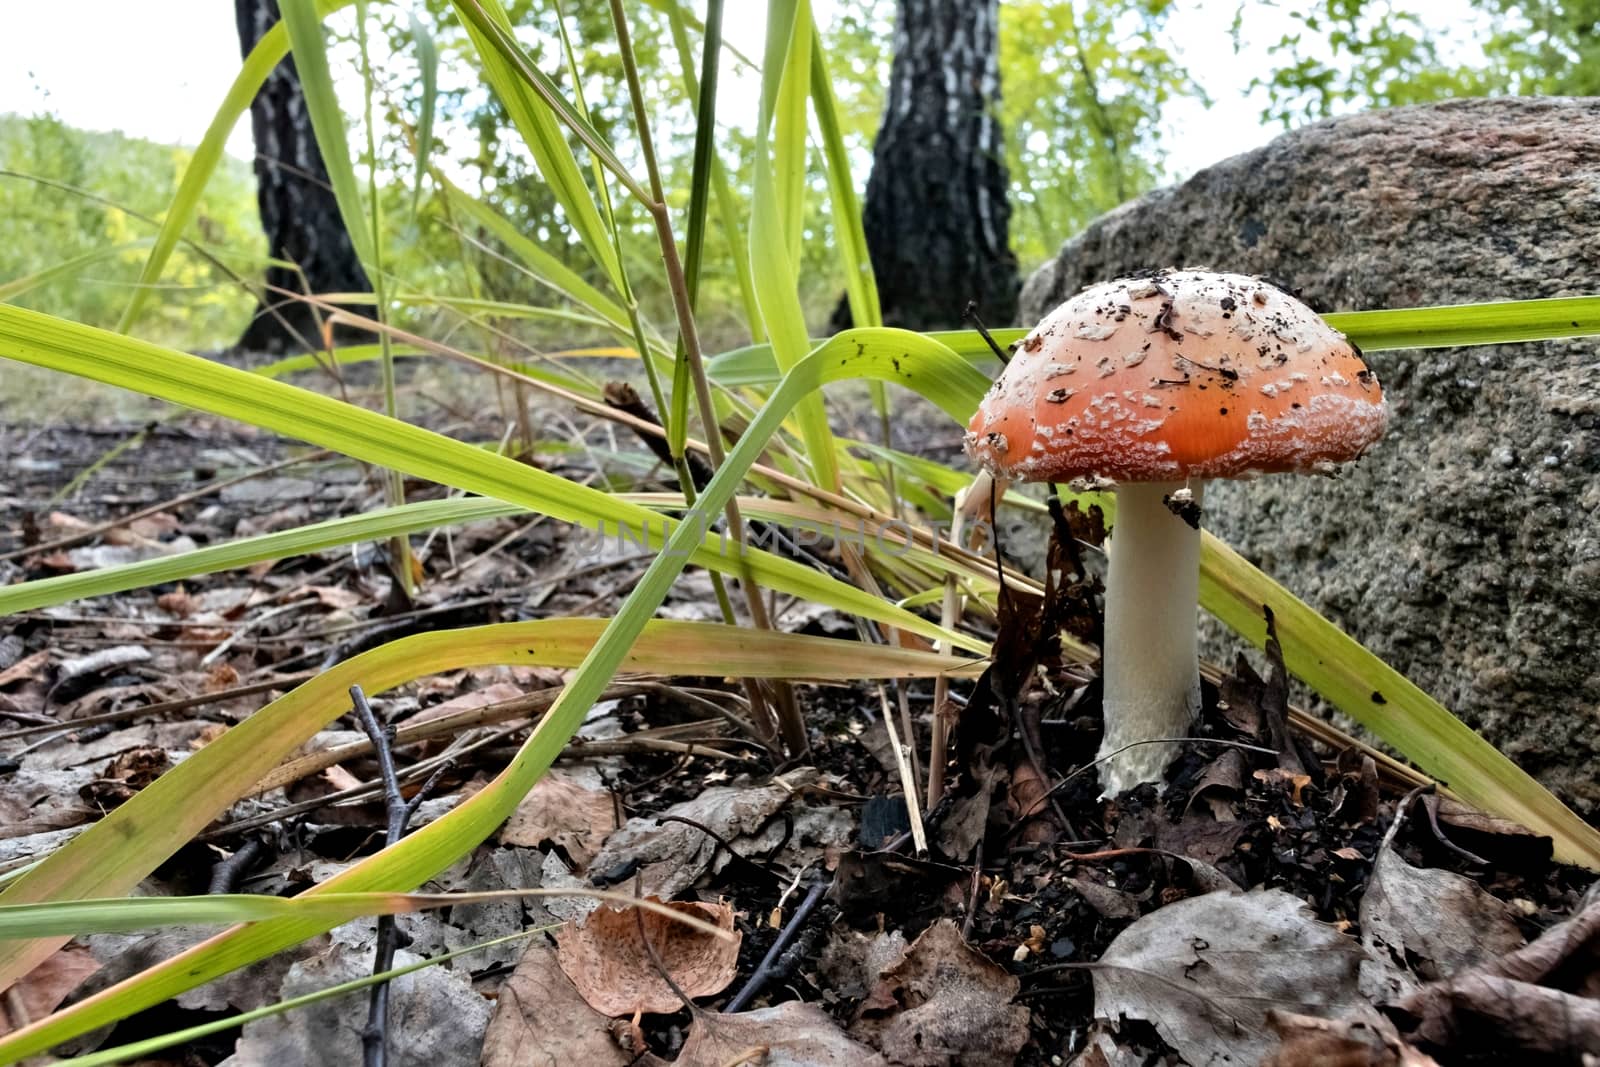 red mushroom with the Latin name Amanita muscaria grew up in the forest under a tree